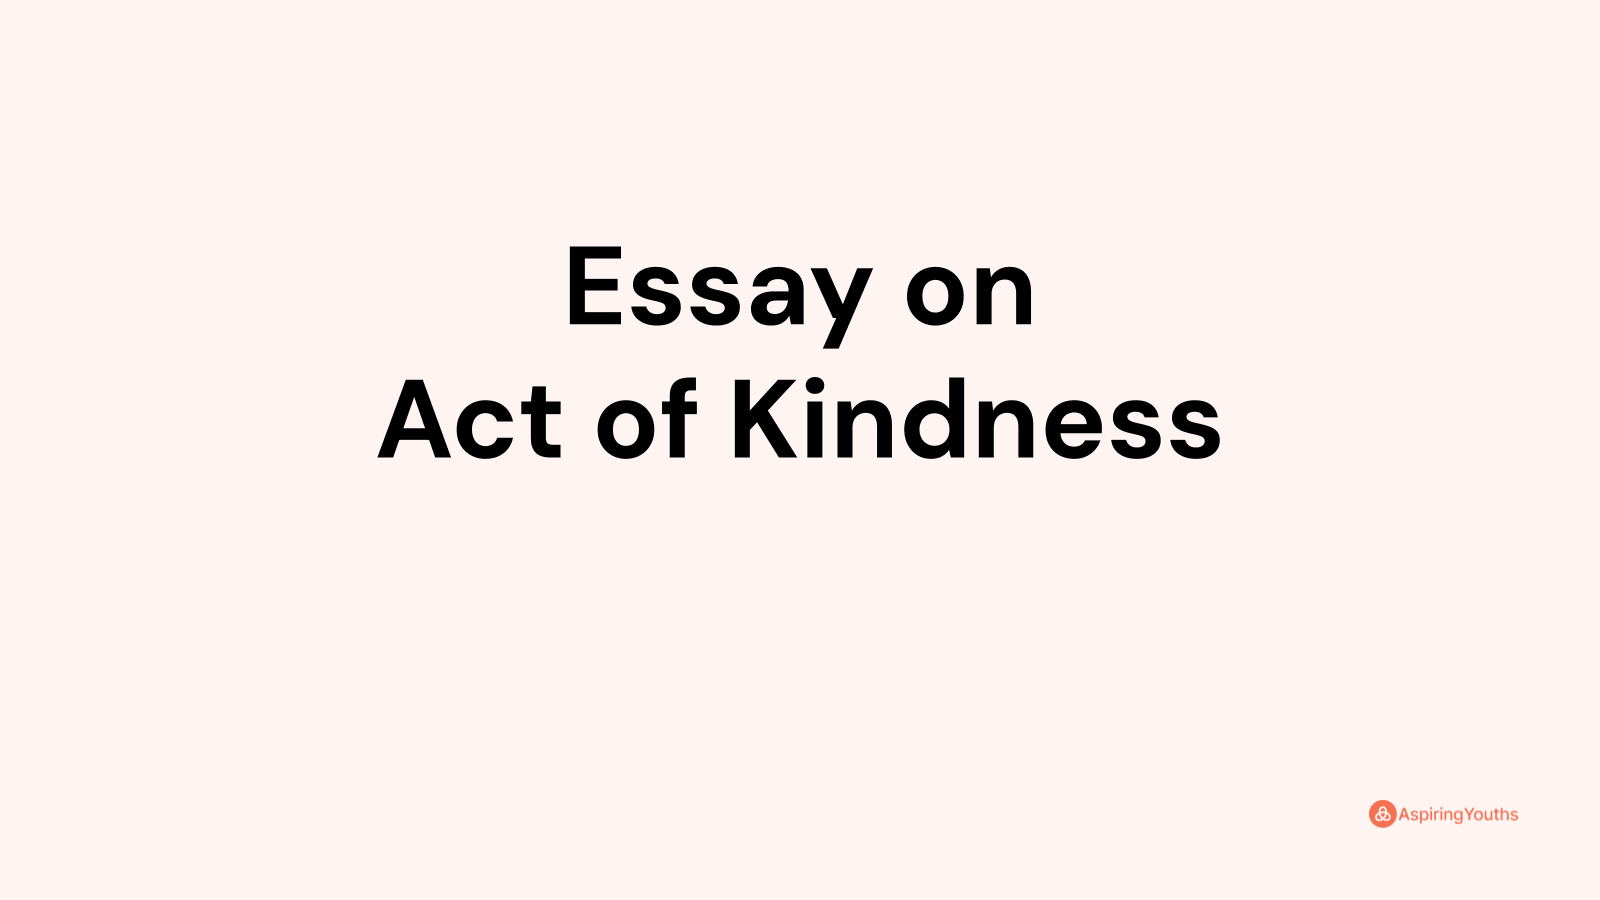 Essay on Act of Kindness